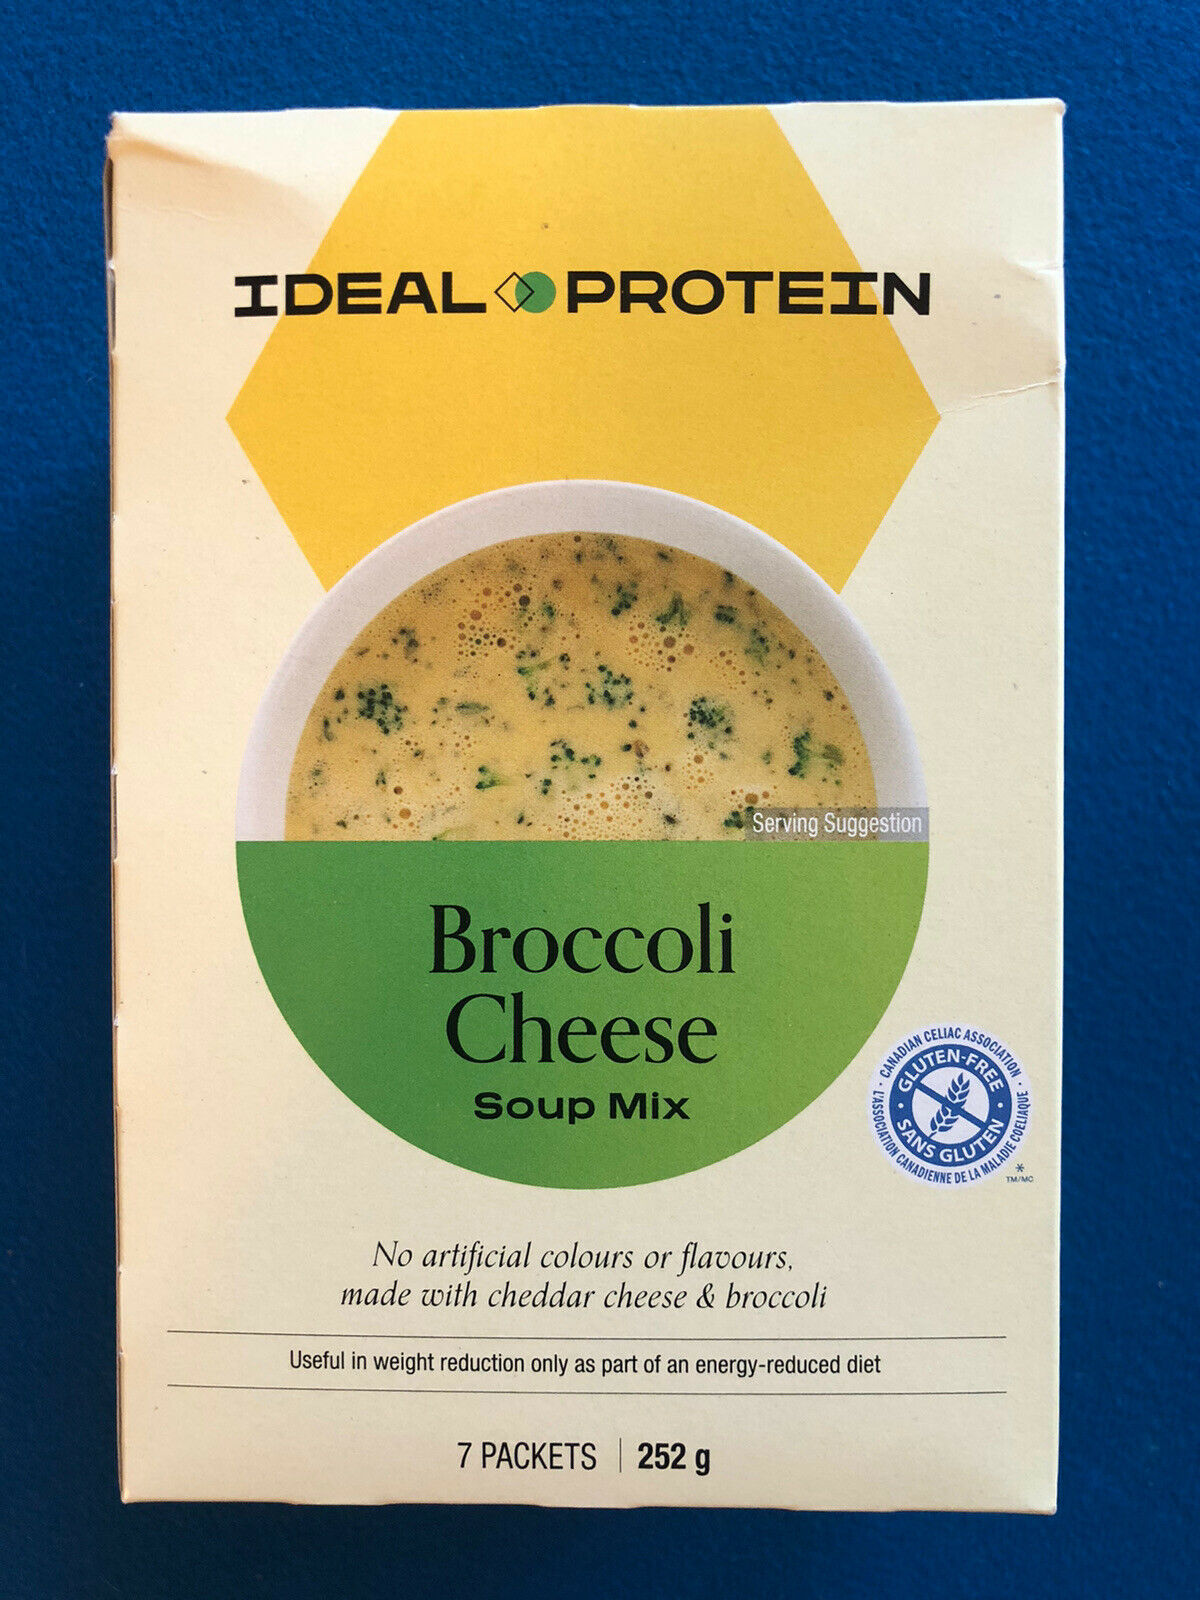 Ideal Protein Broccoli Cheese Soup Mix - 7 Packets - Exp 3/31/22 Free Ship